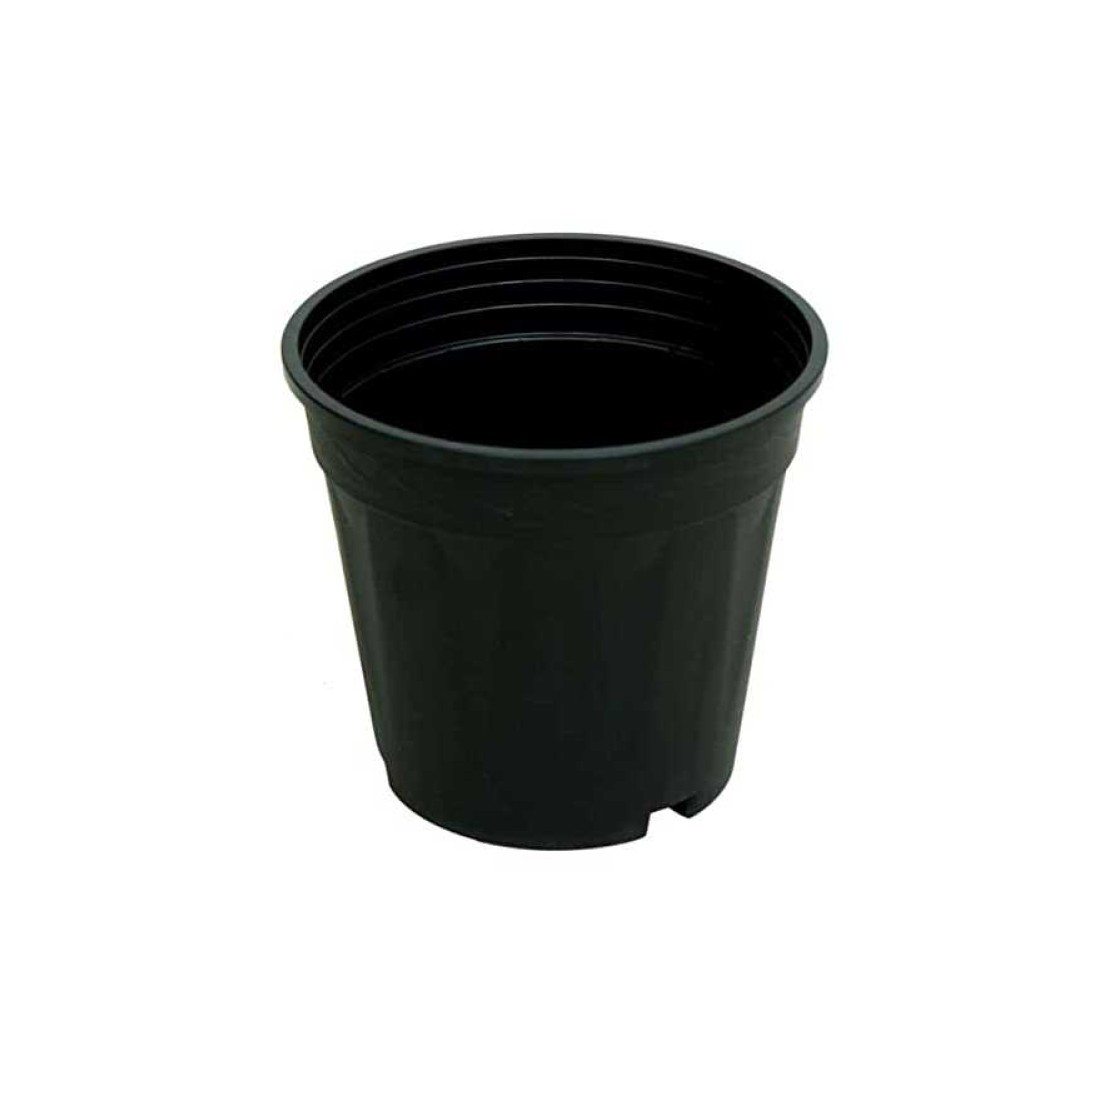 Round Black Nursery Plastic Pot /Grower Pot(size 6inches) pack of 50 pots 1